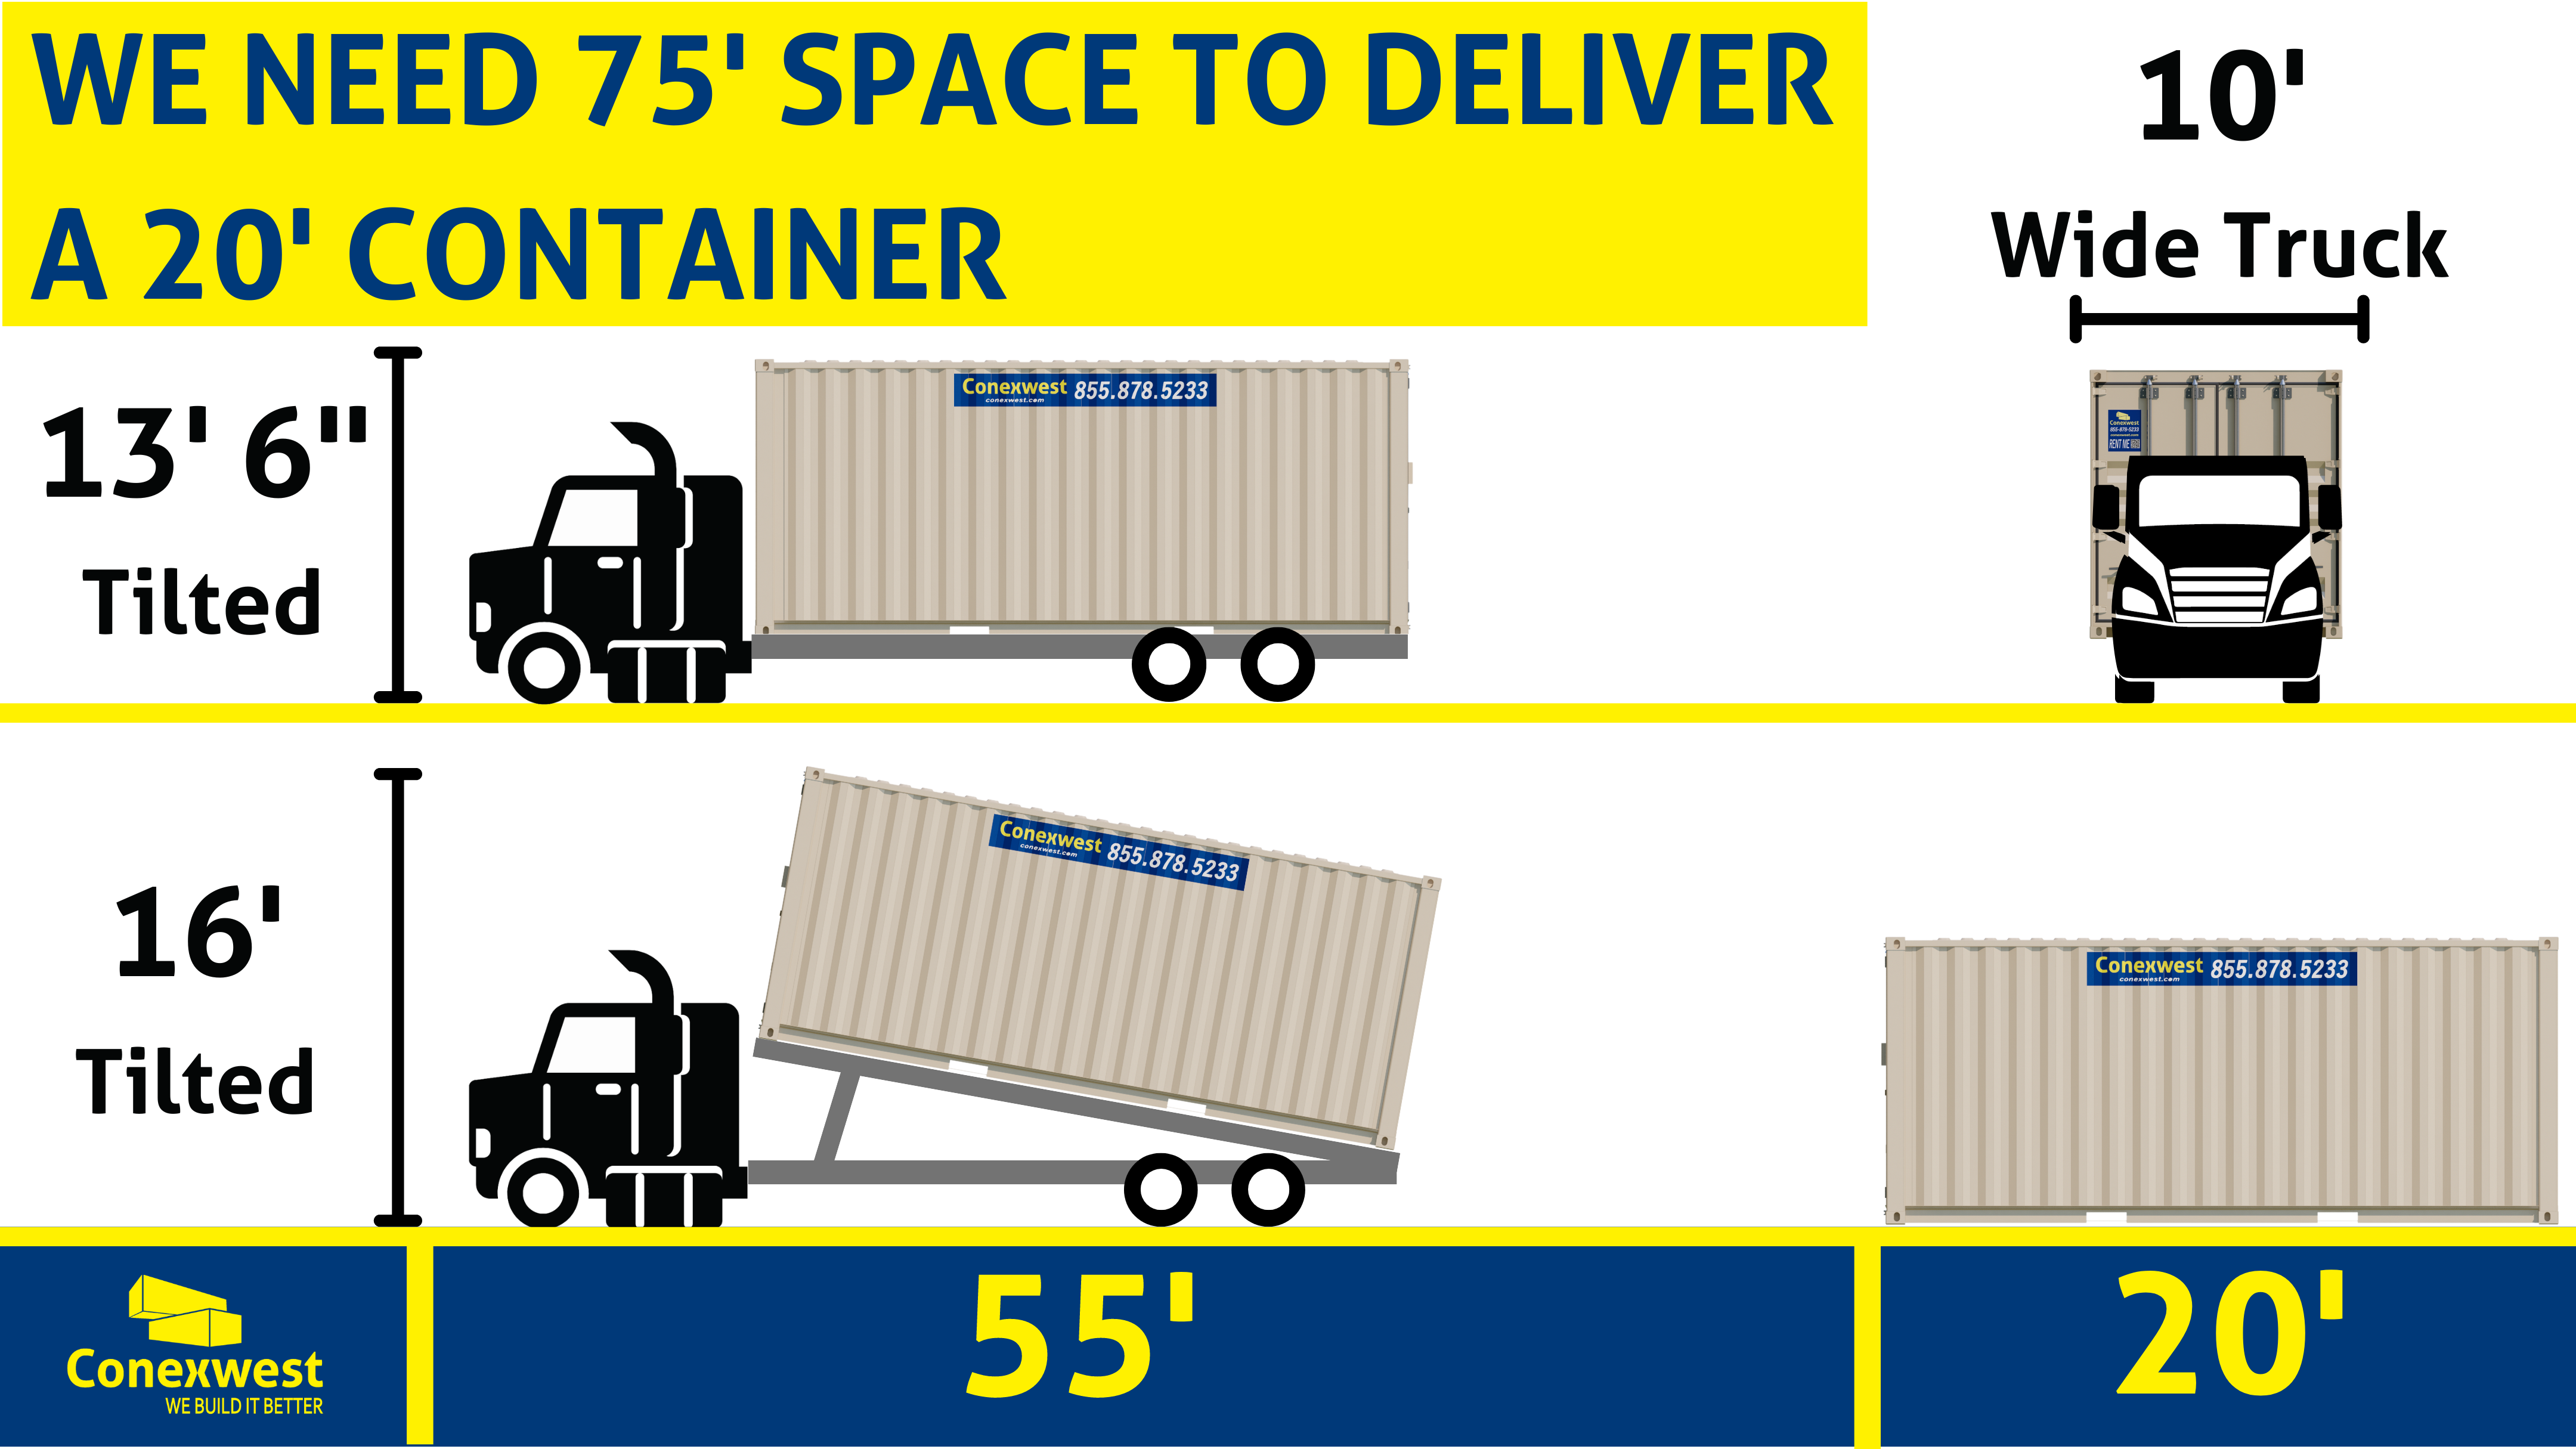 Rental Storage Container Sizes & Solutions